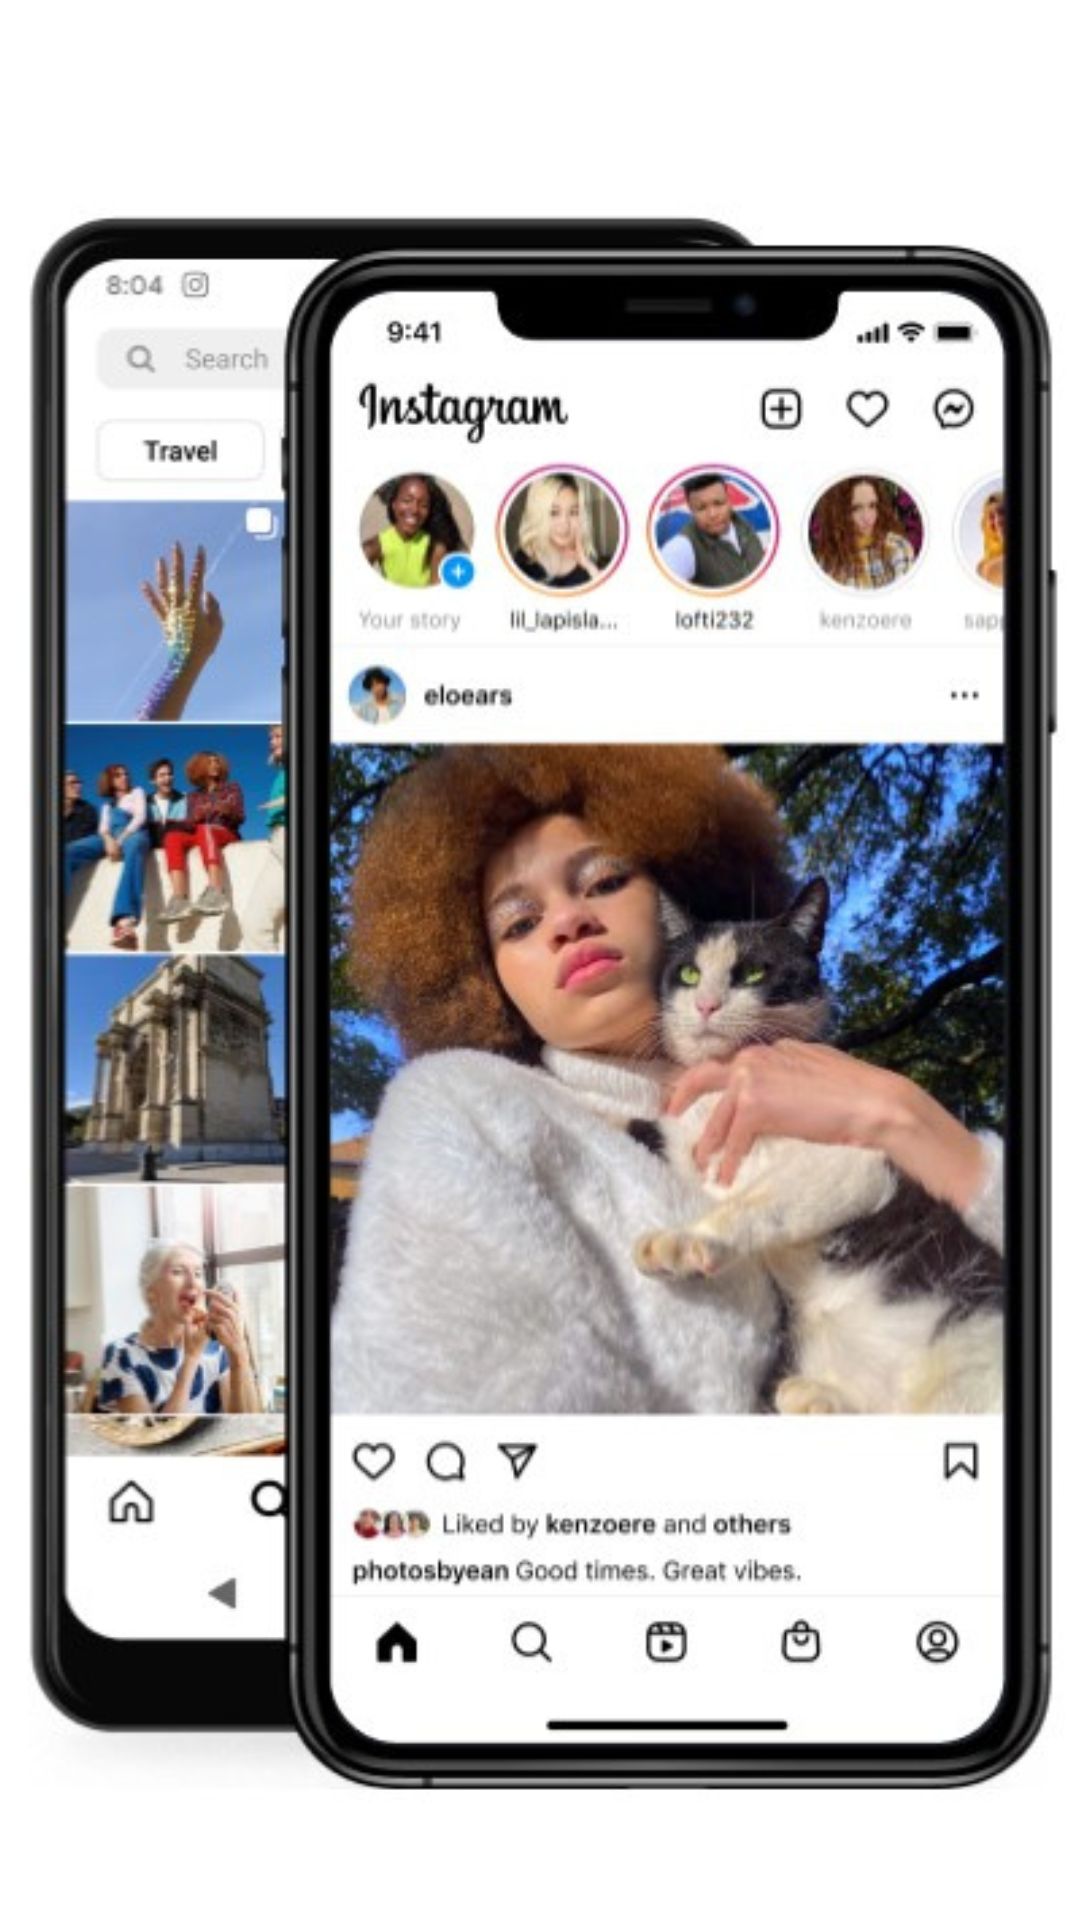 How to add highlights on your Instagram: A step-by-step guide

